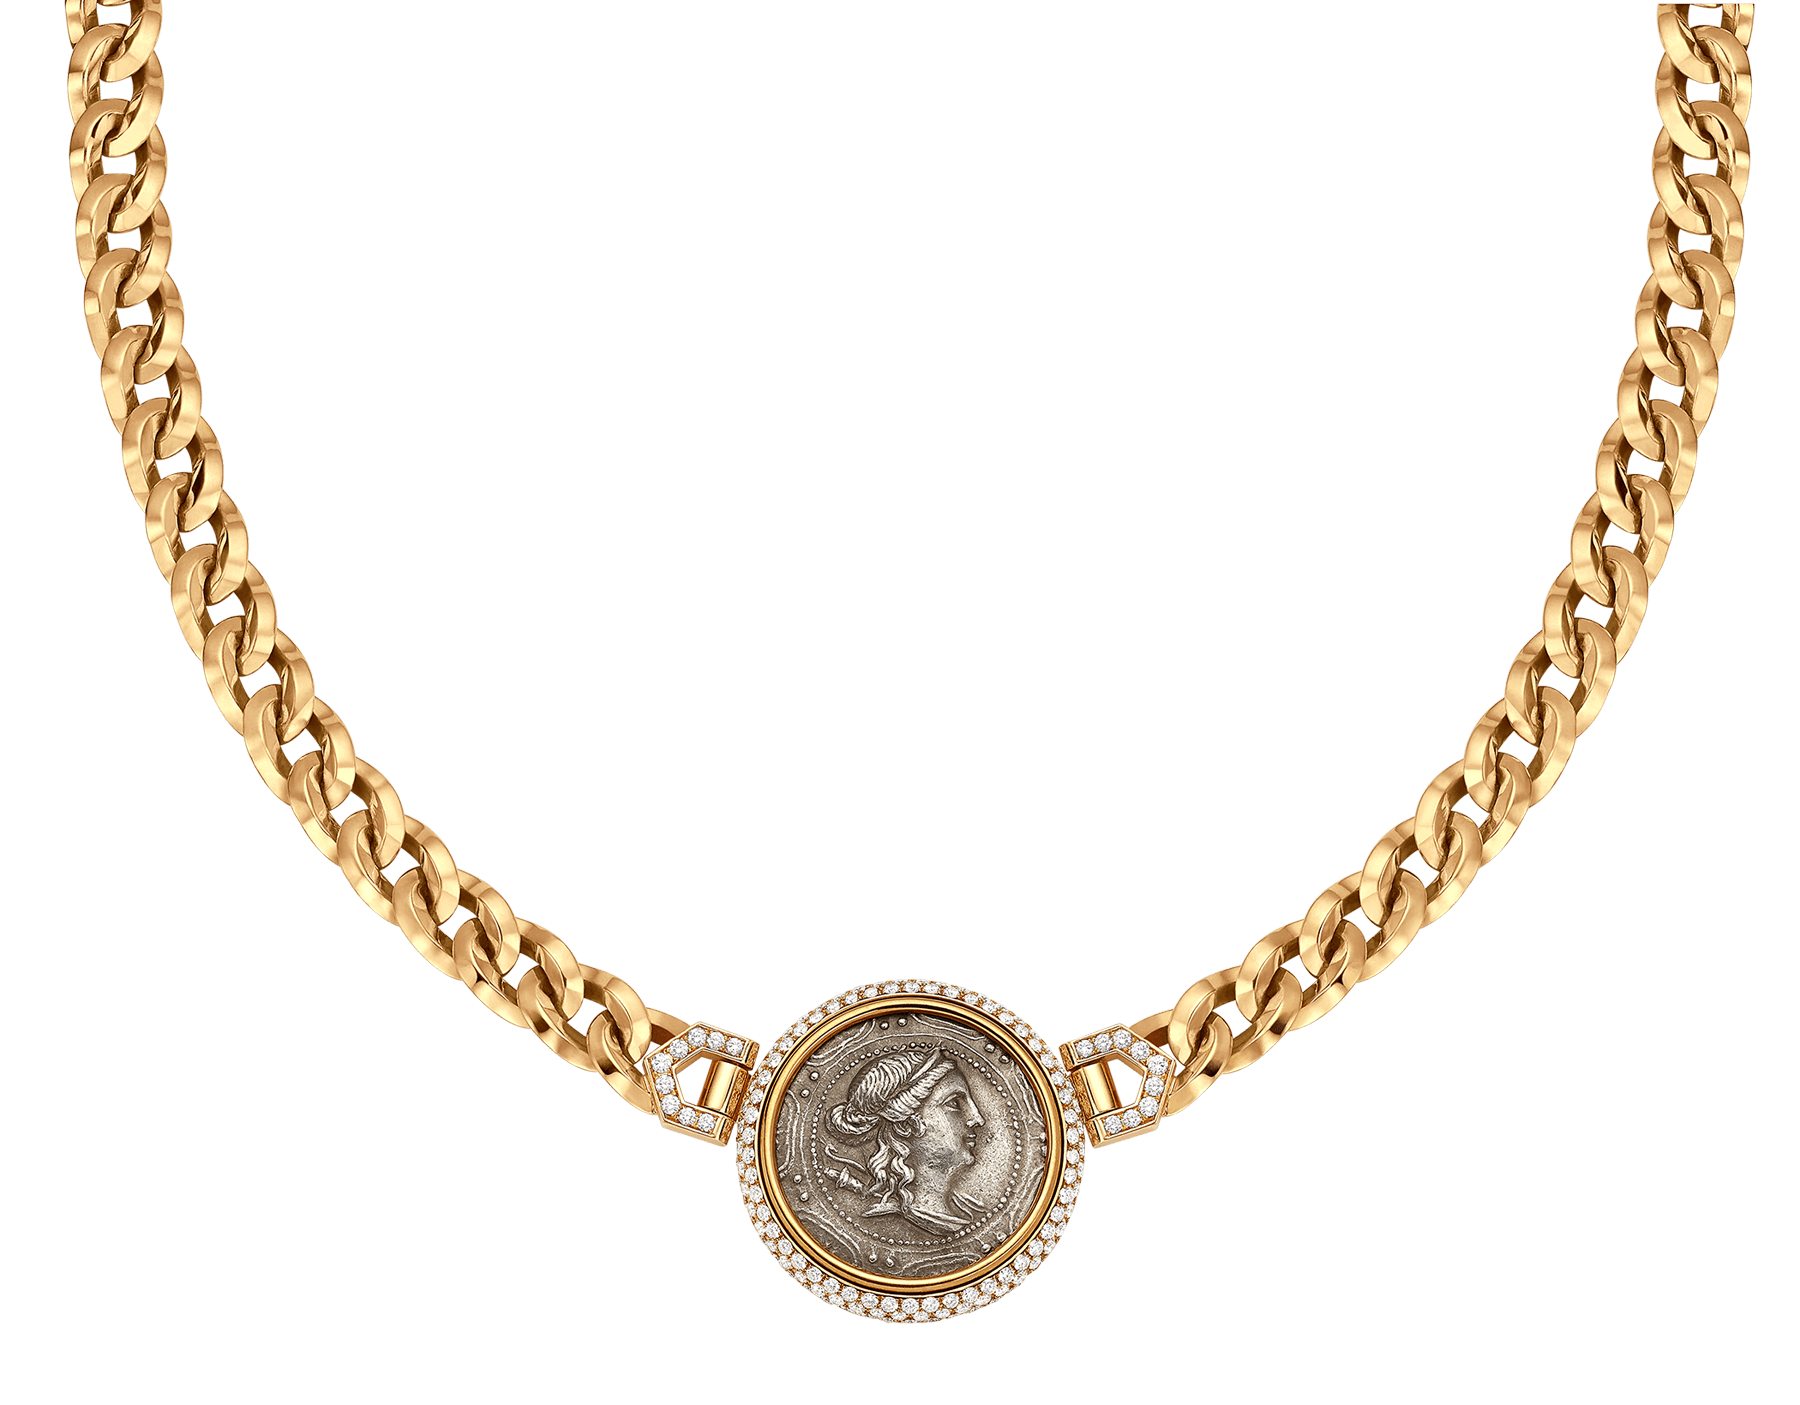 Monete 18 kt rose gold necklace set with an antique silver coin CL859316 image 1